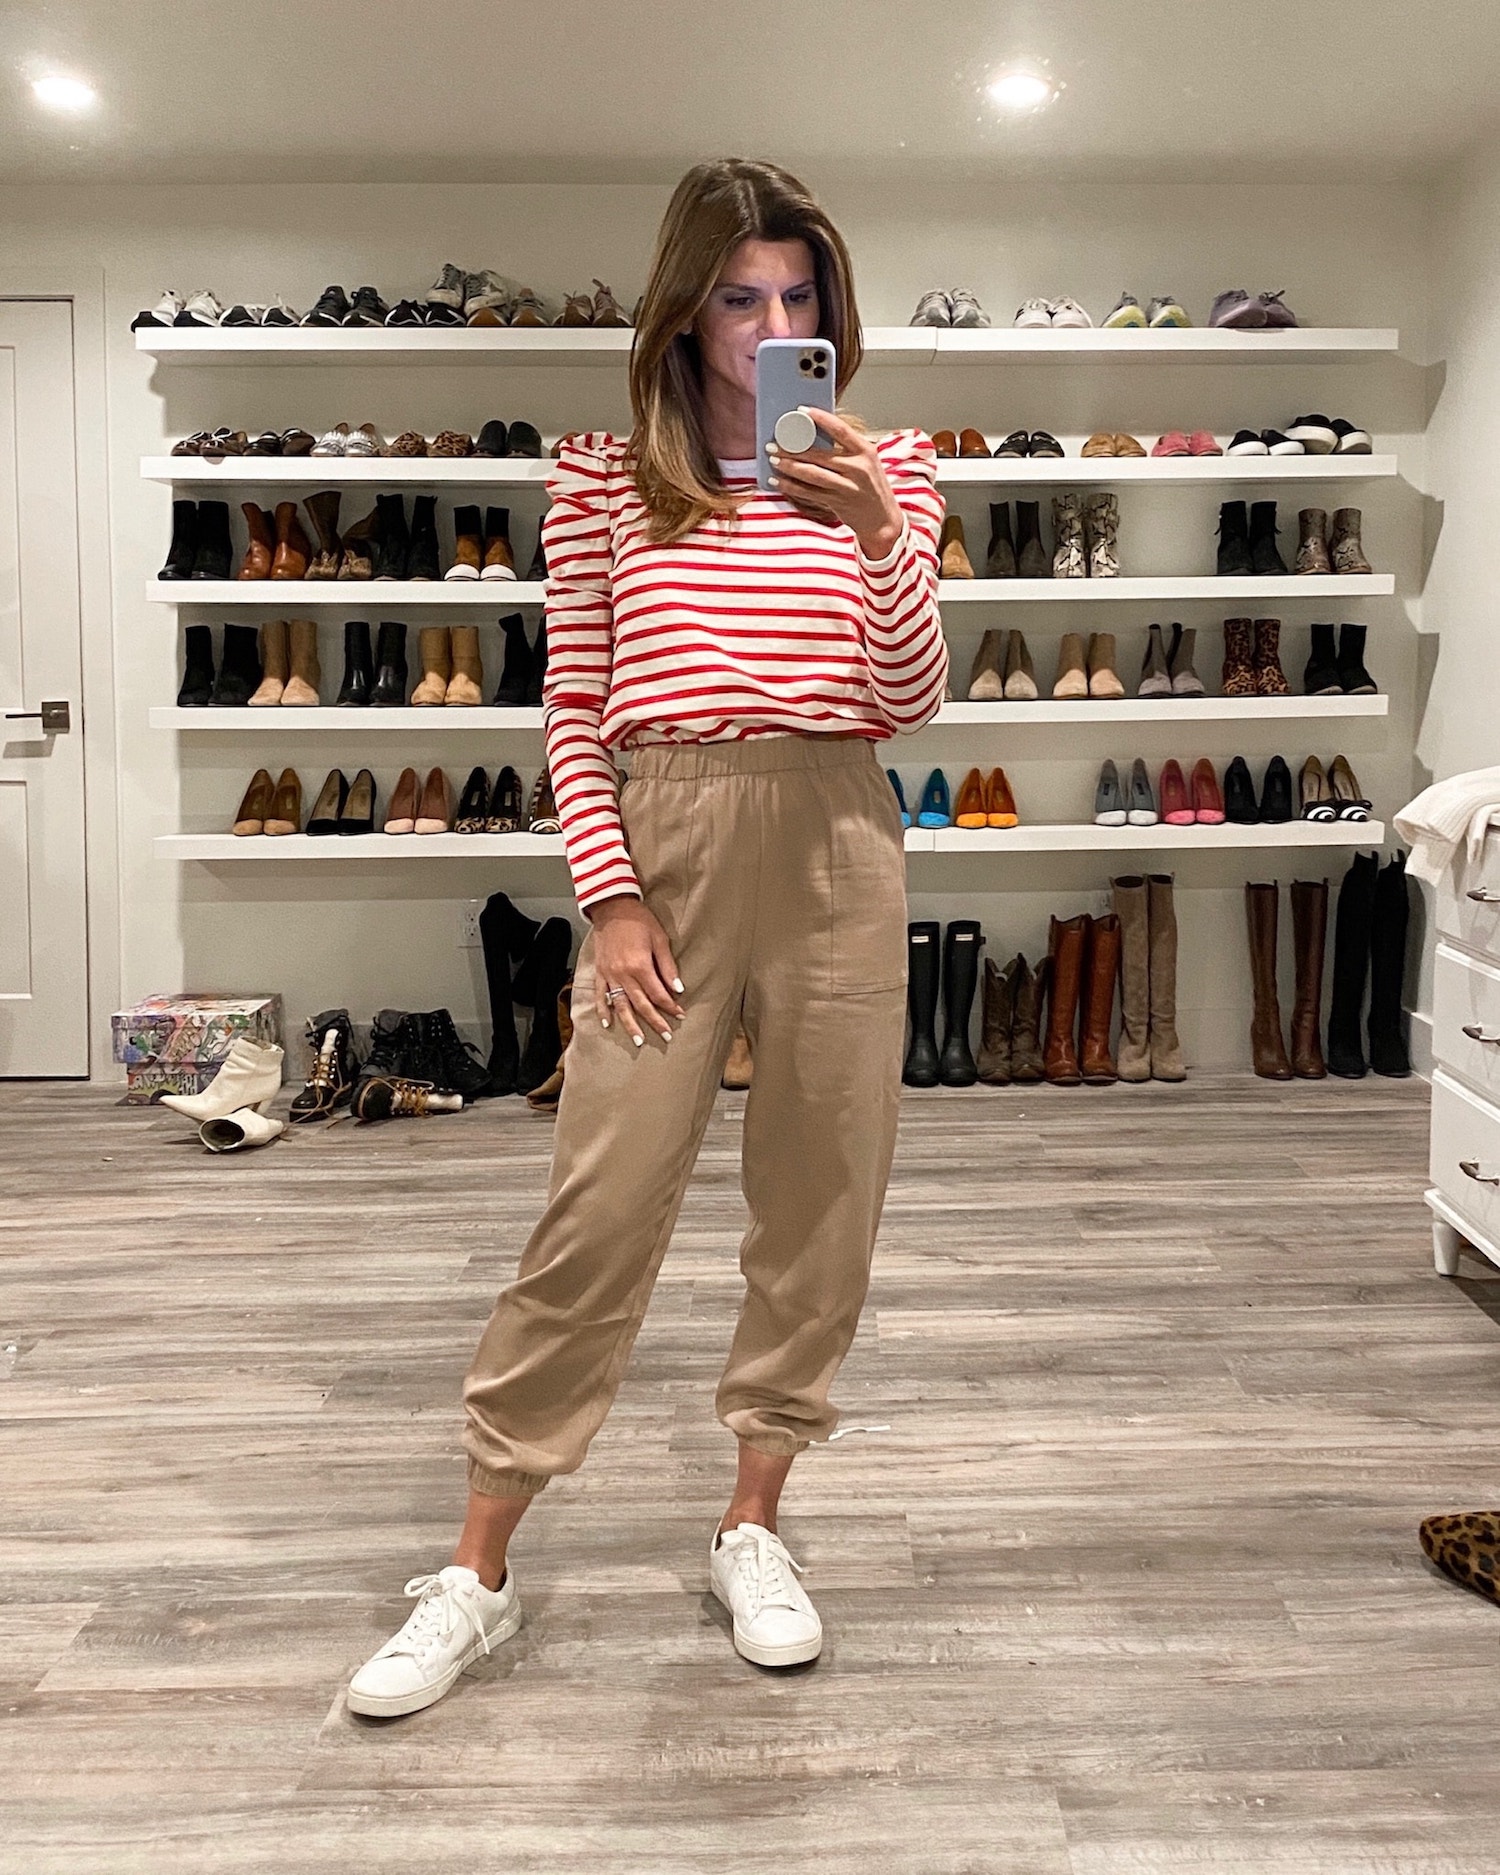 Brighton Keller wearing red and white striped top, joggers and white tennis shoes